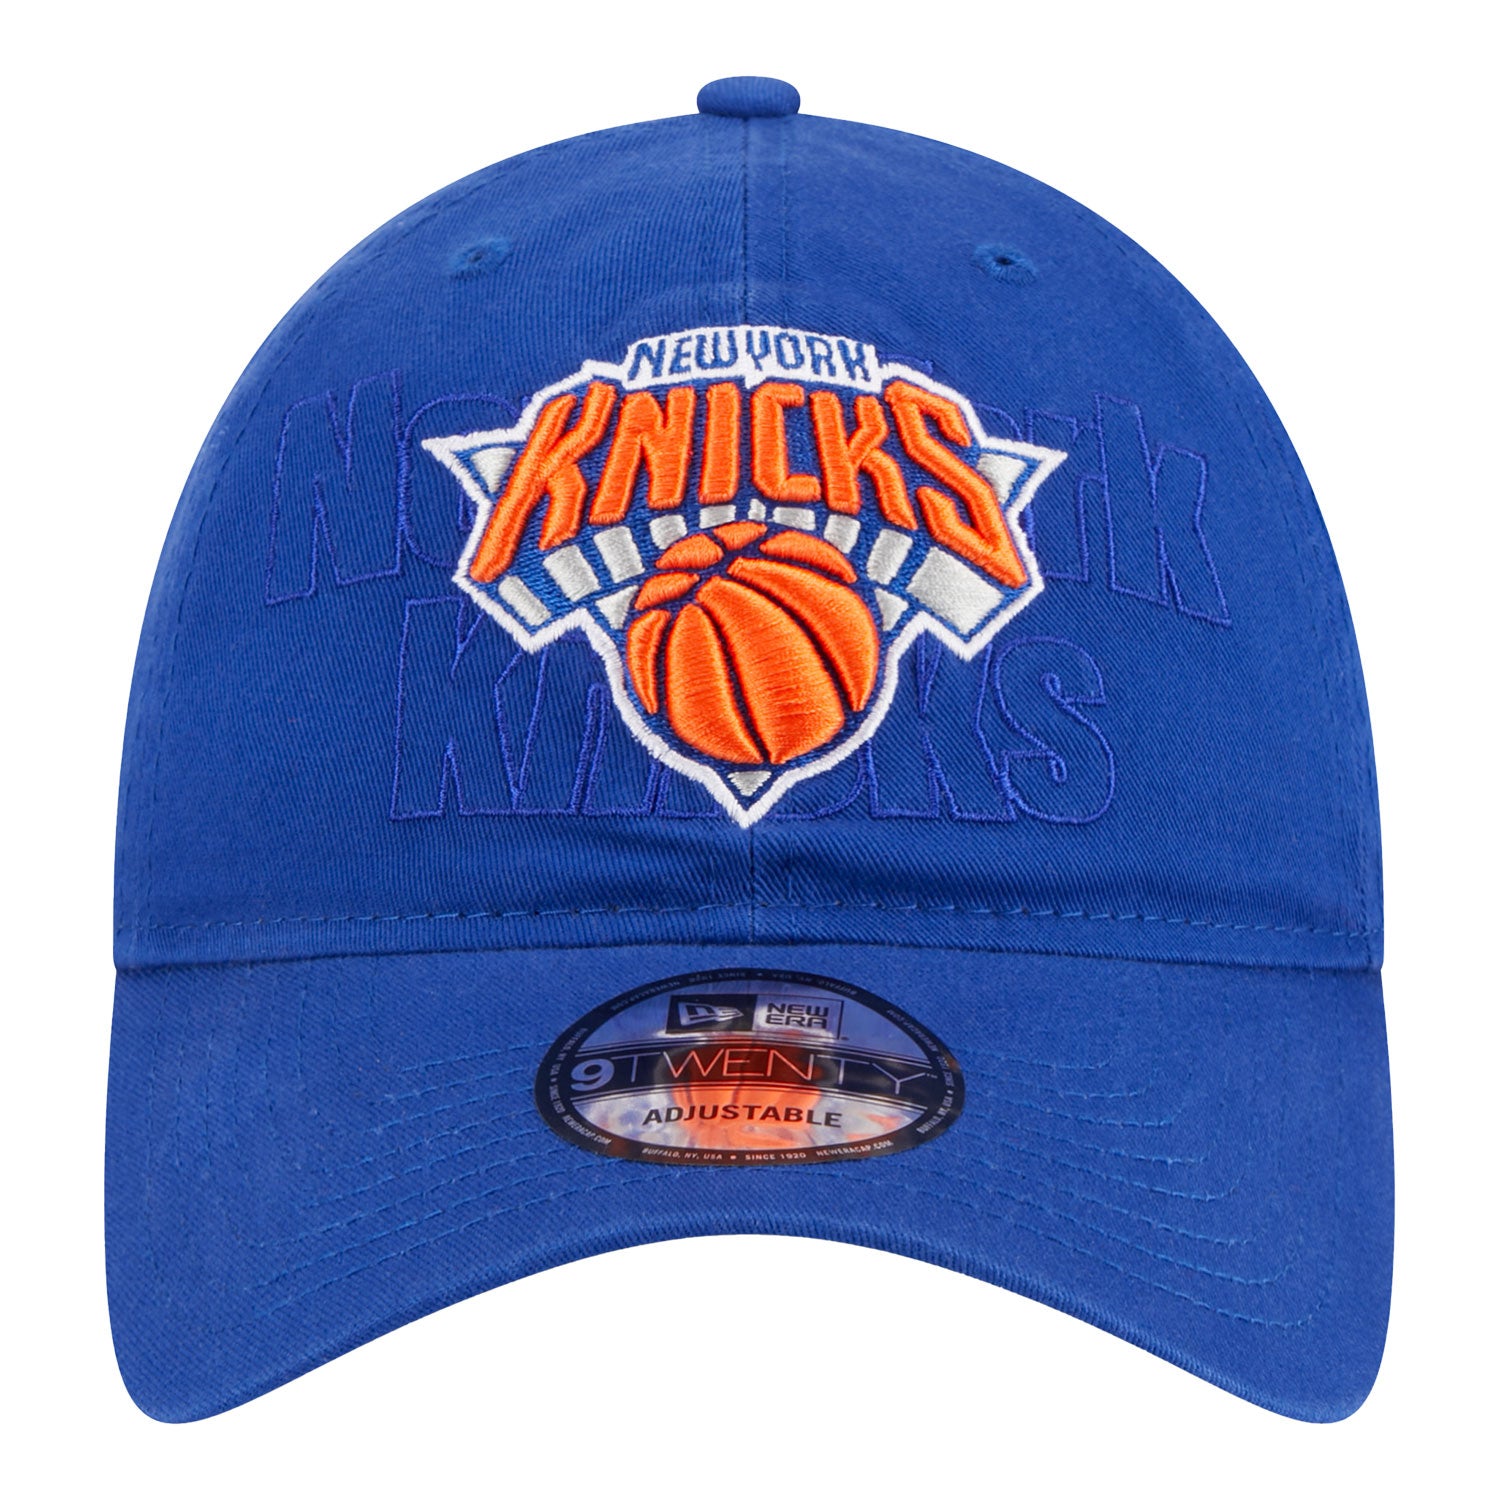 New Era knicks 2023 Draft 920 Adjustable Hat - In Blue - Front View